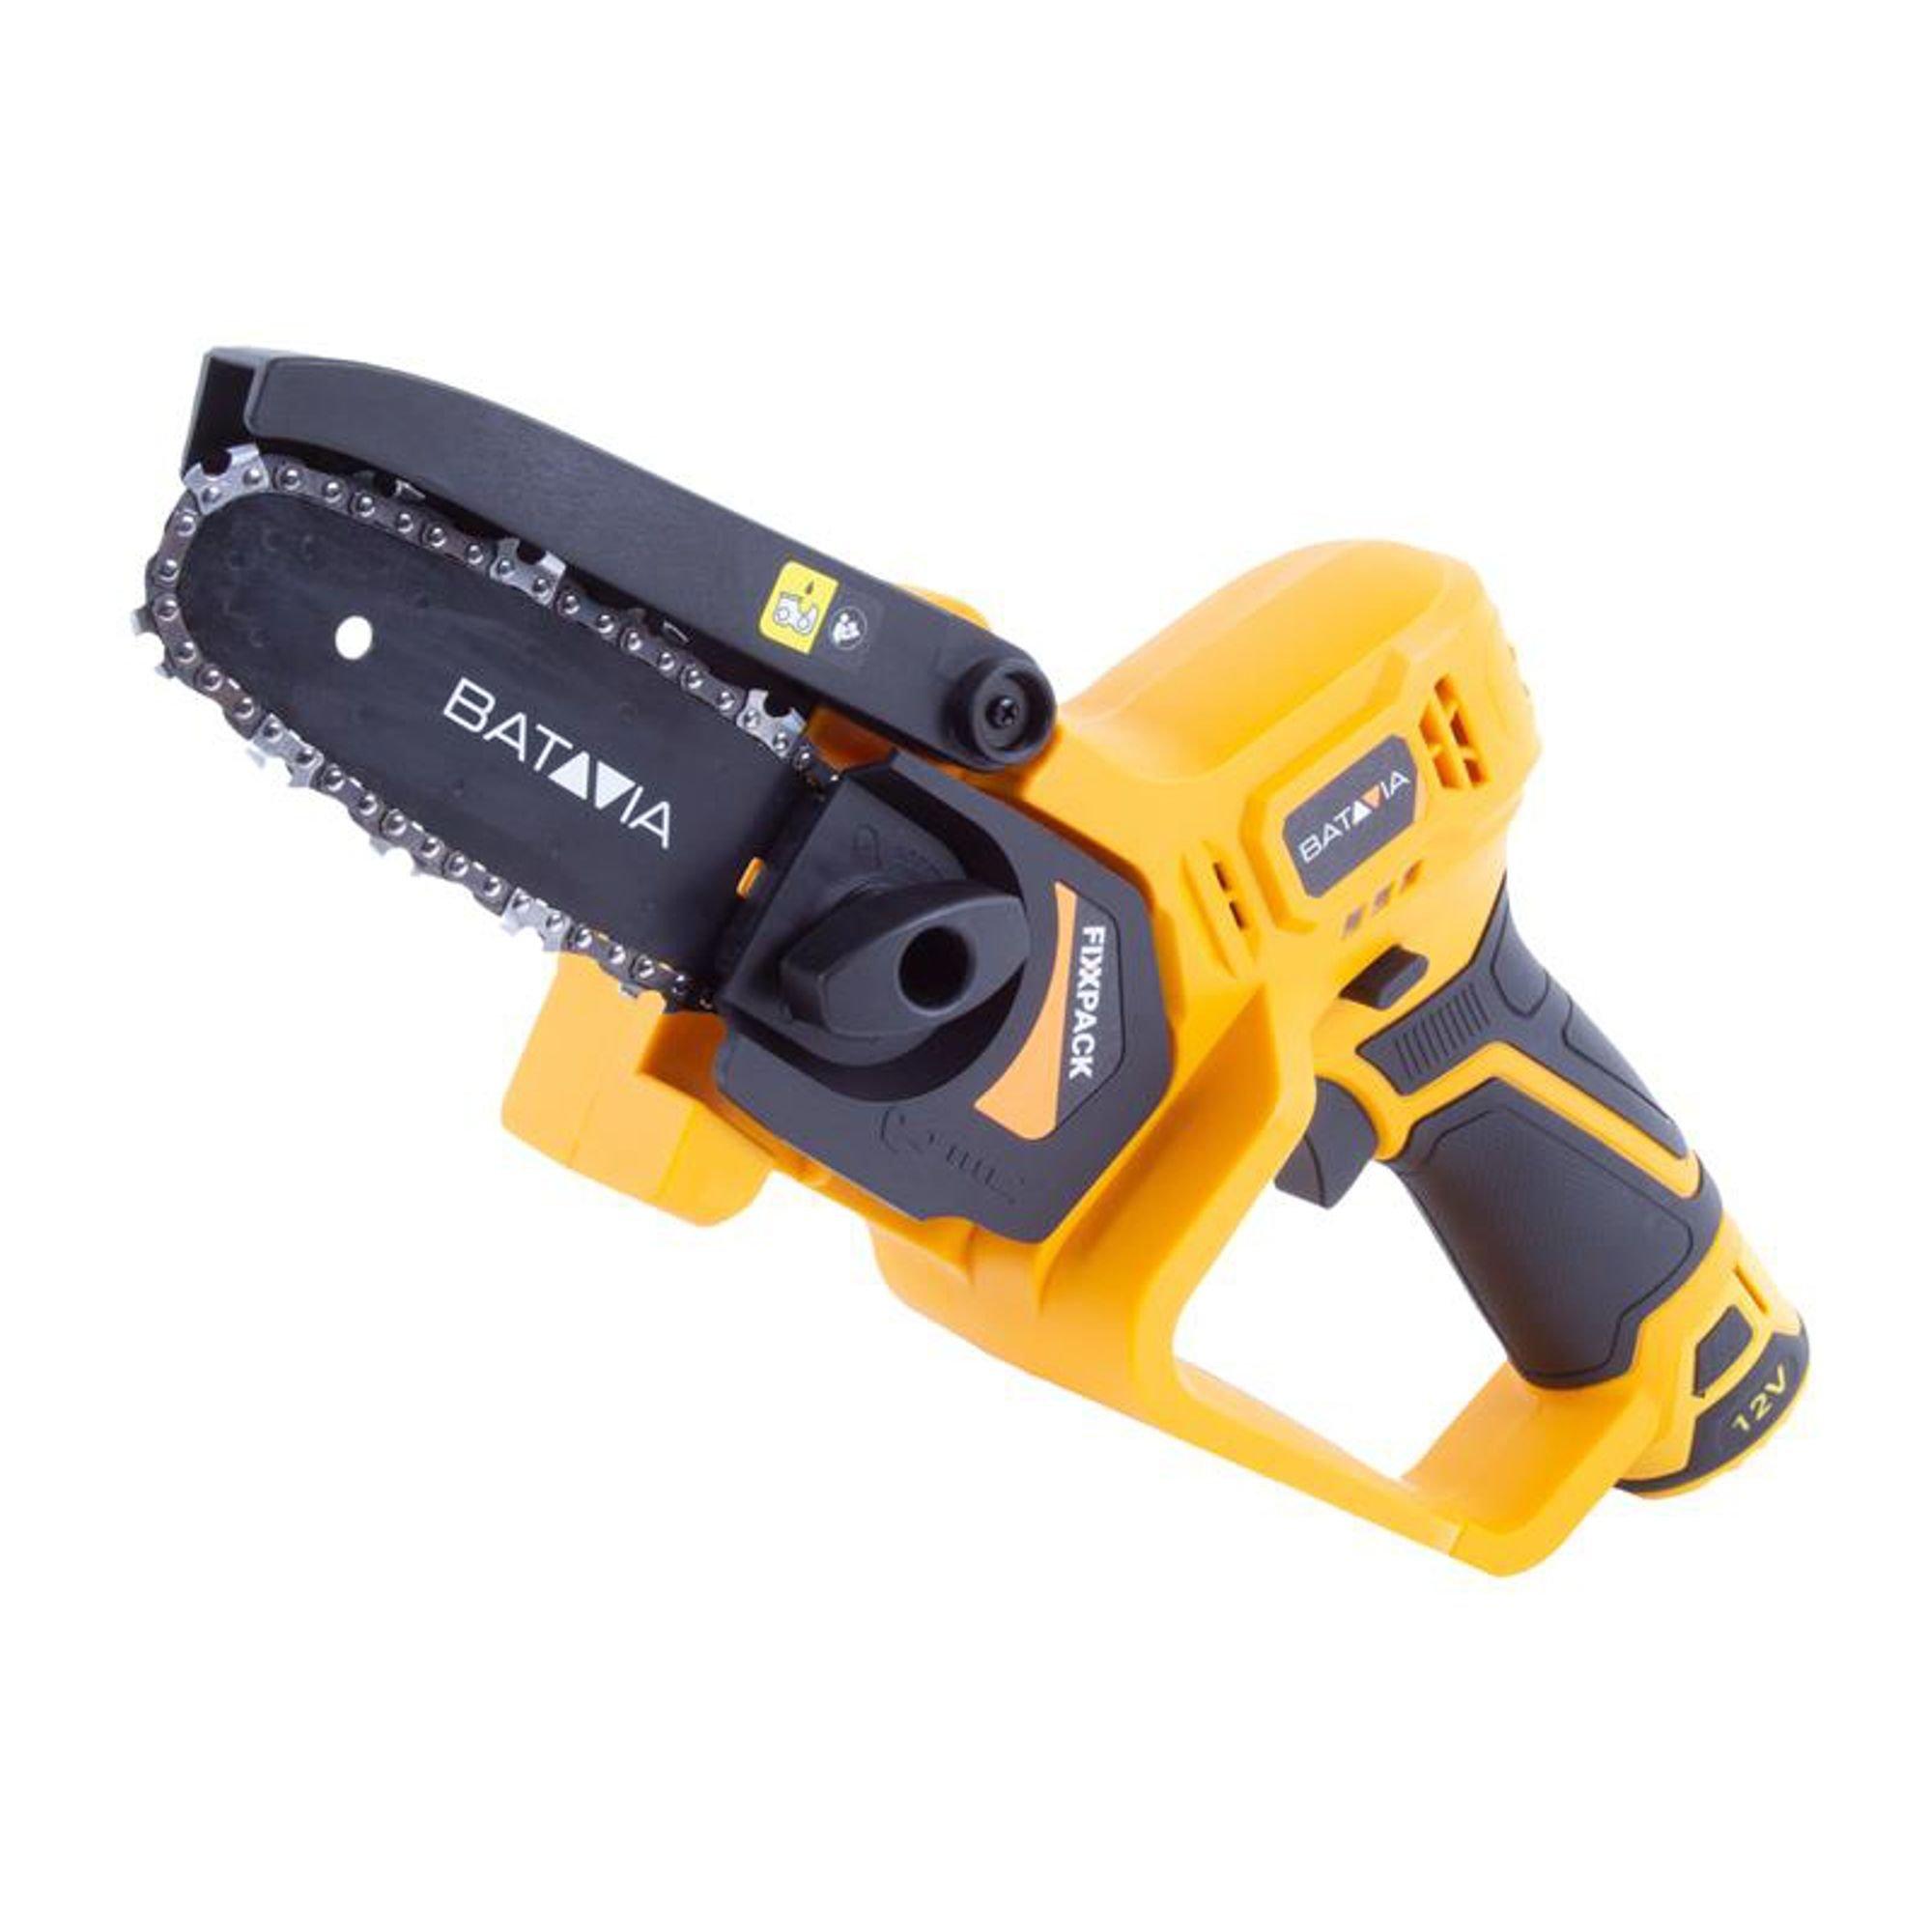 'FIXXPACK' One-Handed Chainsaw 12V